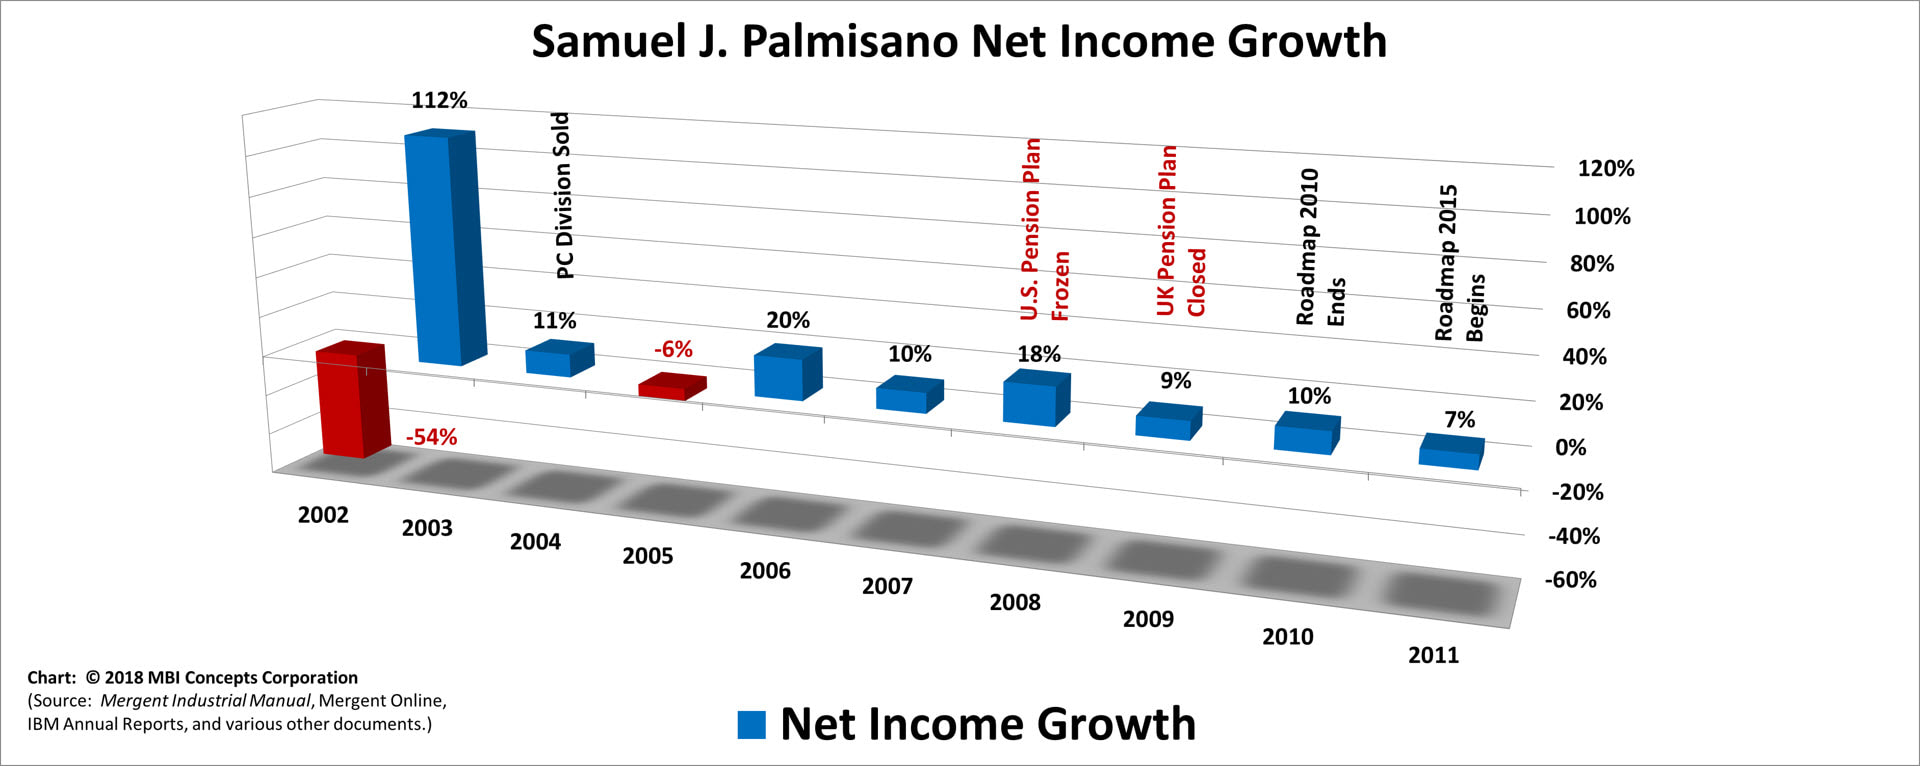 A color bar chart showing IBM's net income (profit) growth from 2002 to 2011 for Samuel J. (Sam) Palmisano.